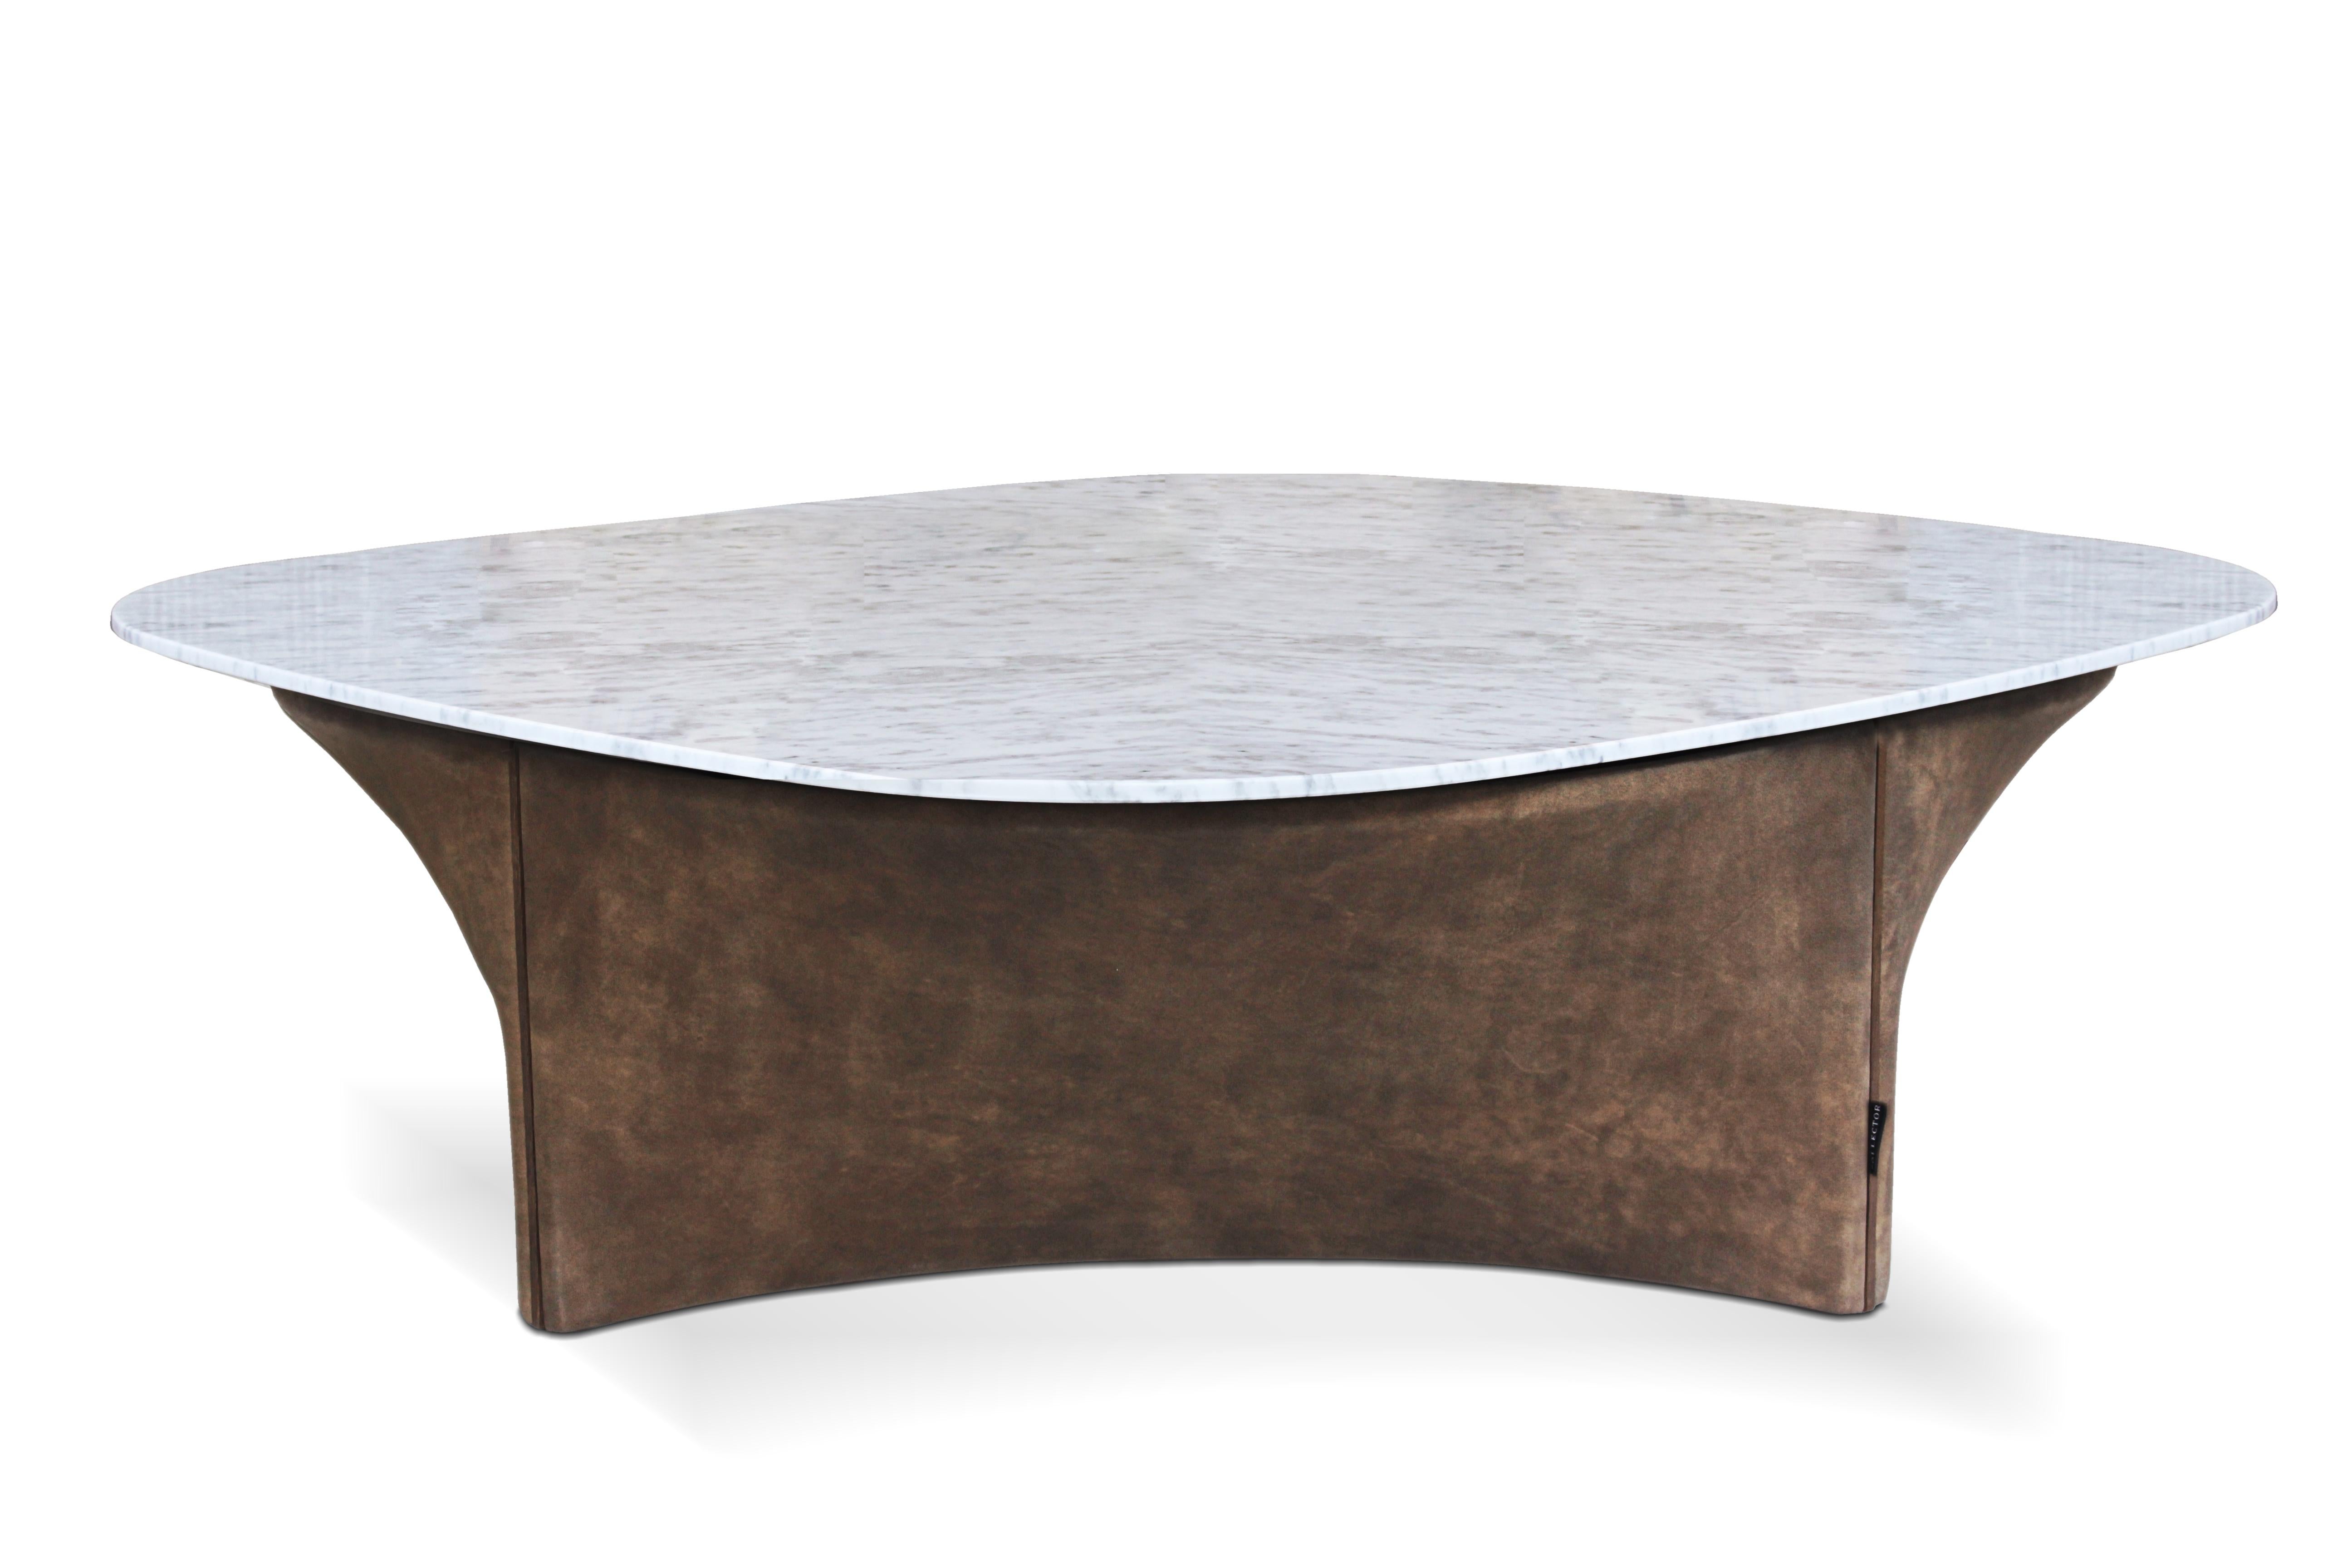 Lauren center table by Collector
Materials: Base structure upholstered in leather with wood details. Marble top.
Dimensions: W 115 x D 115 x H 35 cm

A center table with special light reflections that enhance the exclusive quality of the leather